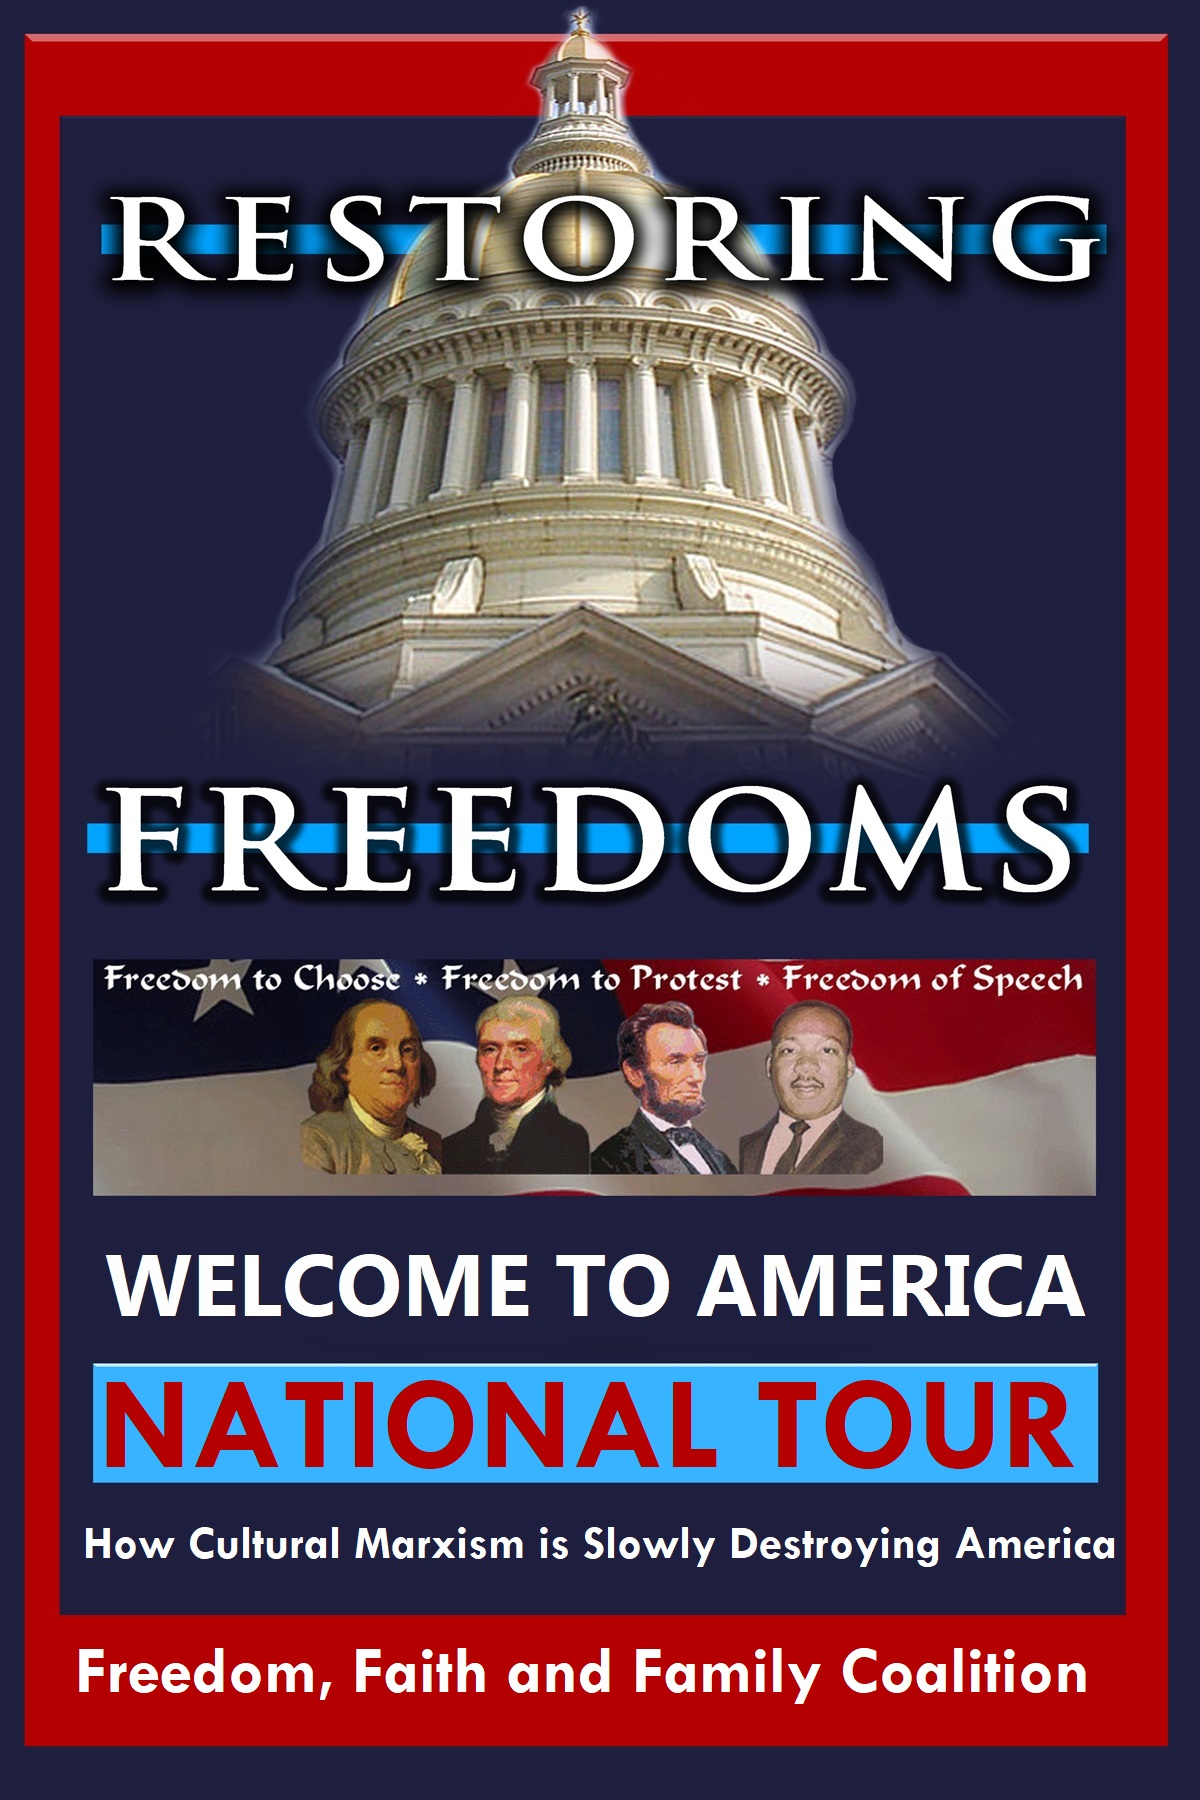 Daryl M. Brooks RESTORING FREEDOMS Speaking Tour - Freedom, Faith and Family Coalition - We hold these truths to be self-evident